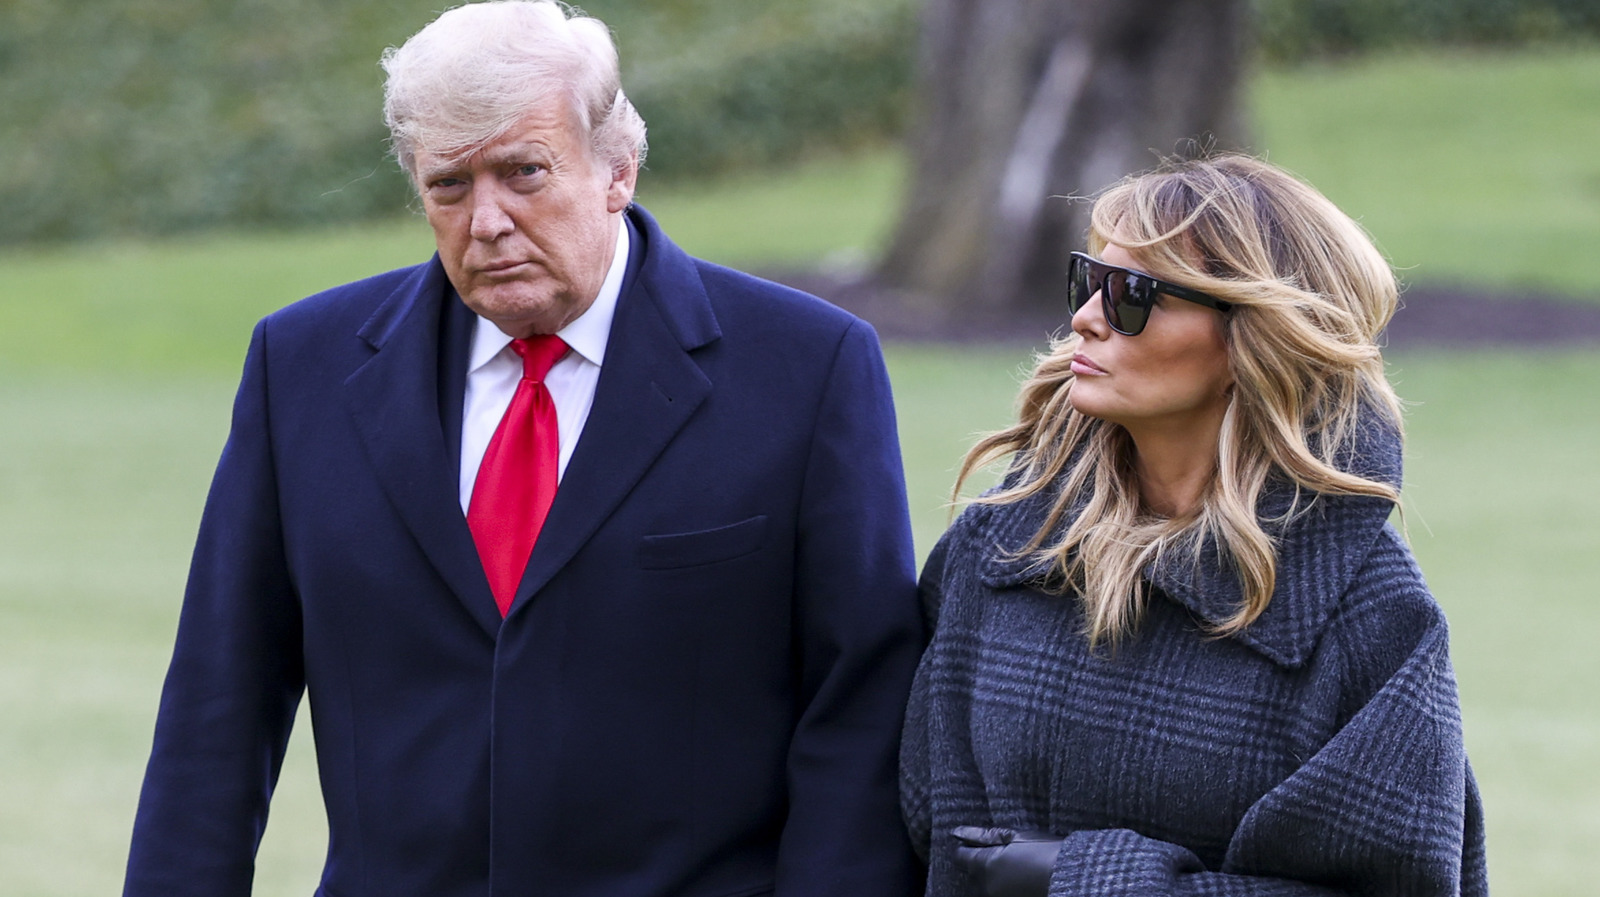 What The Final Days Were Like For The Trump Family In The White House